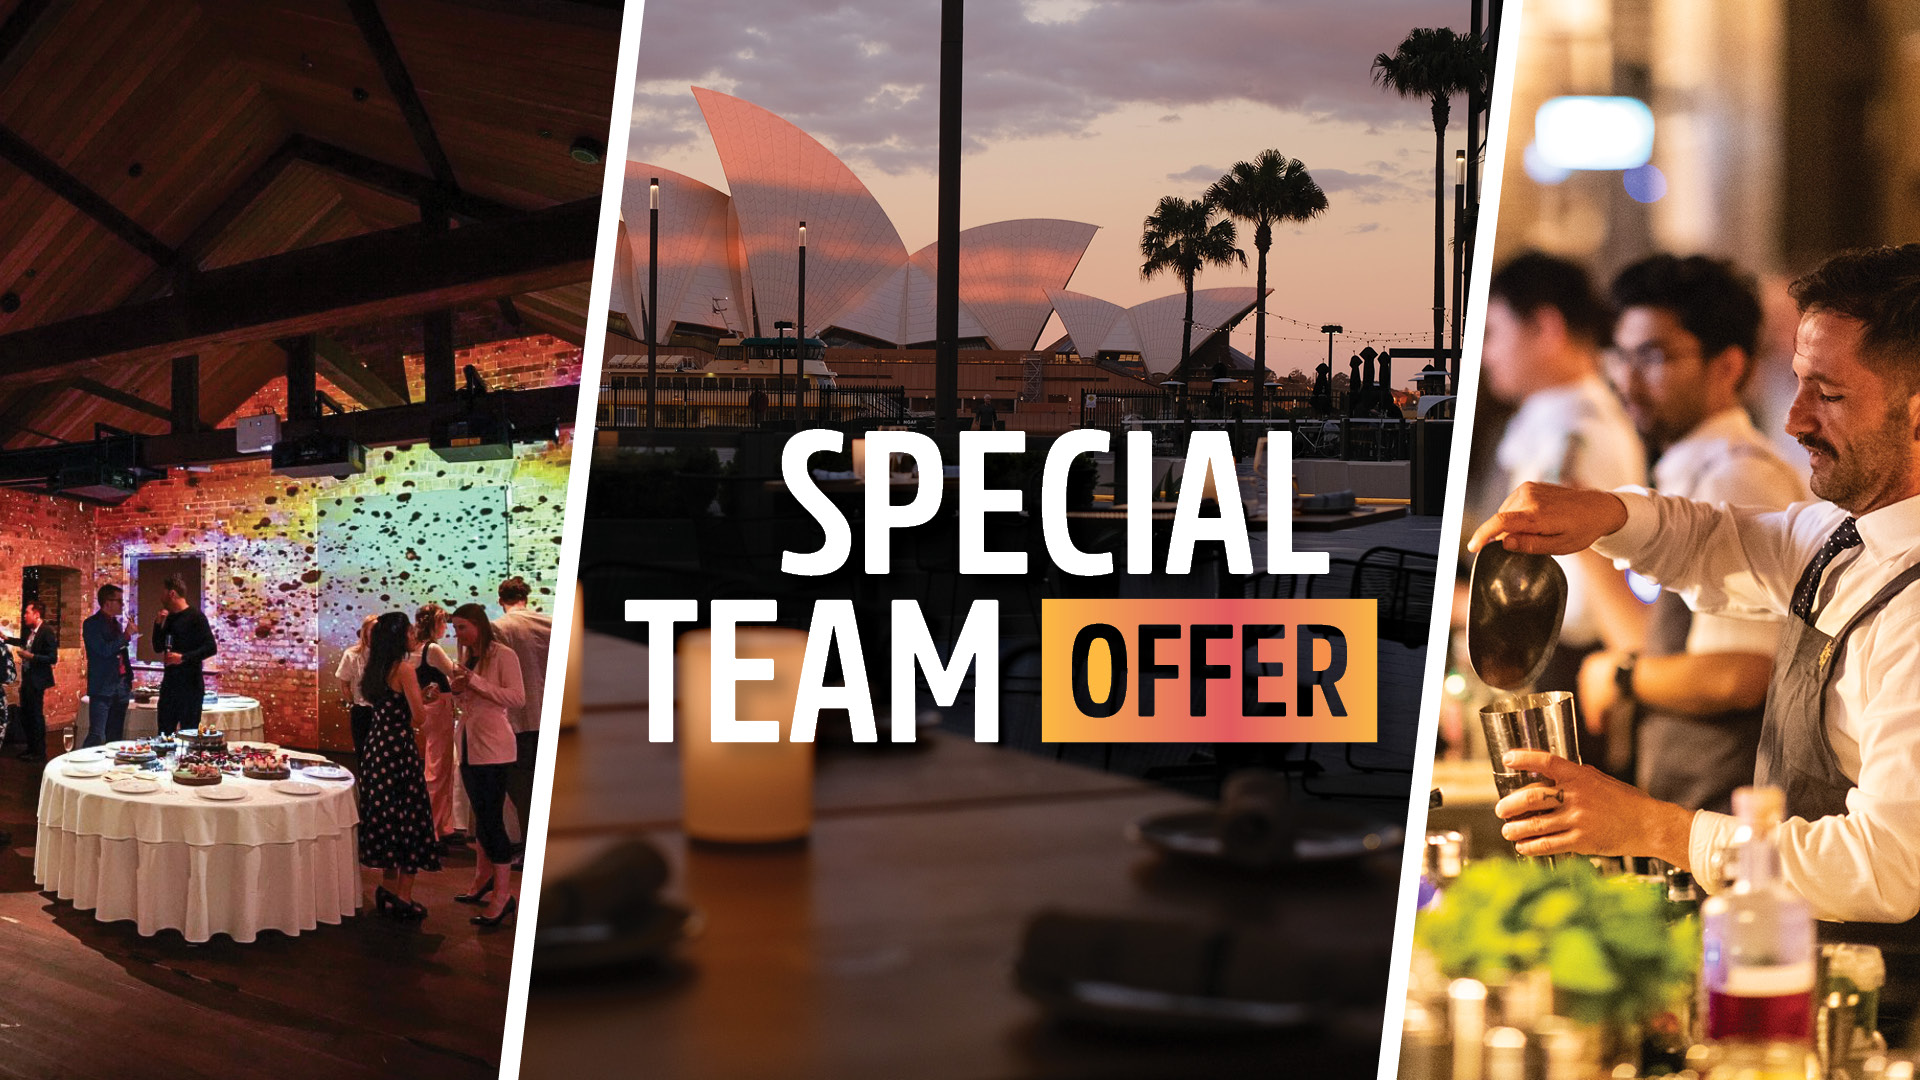 vivid sydney special offer for teams including a bridgeclimb and a dining experience